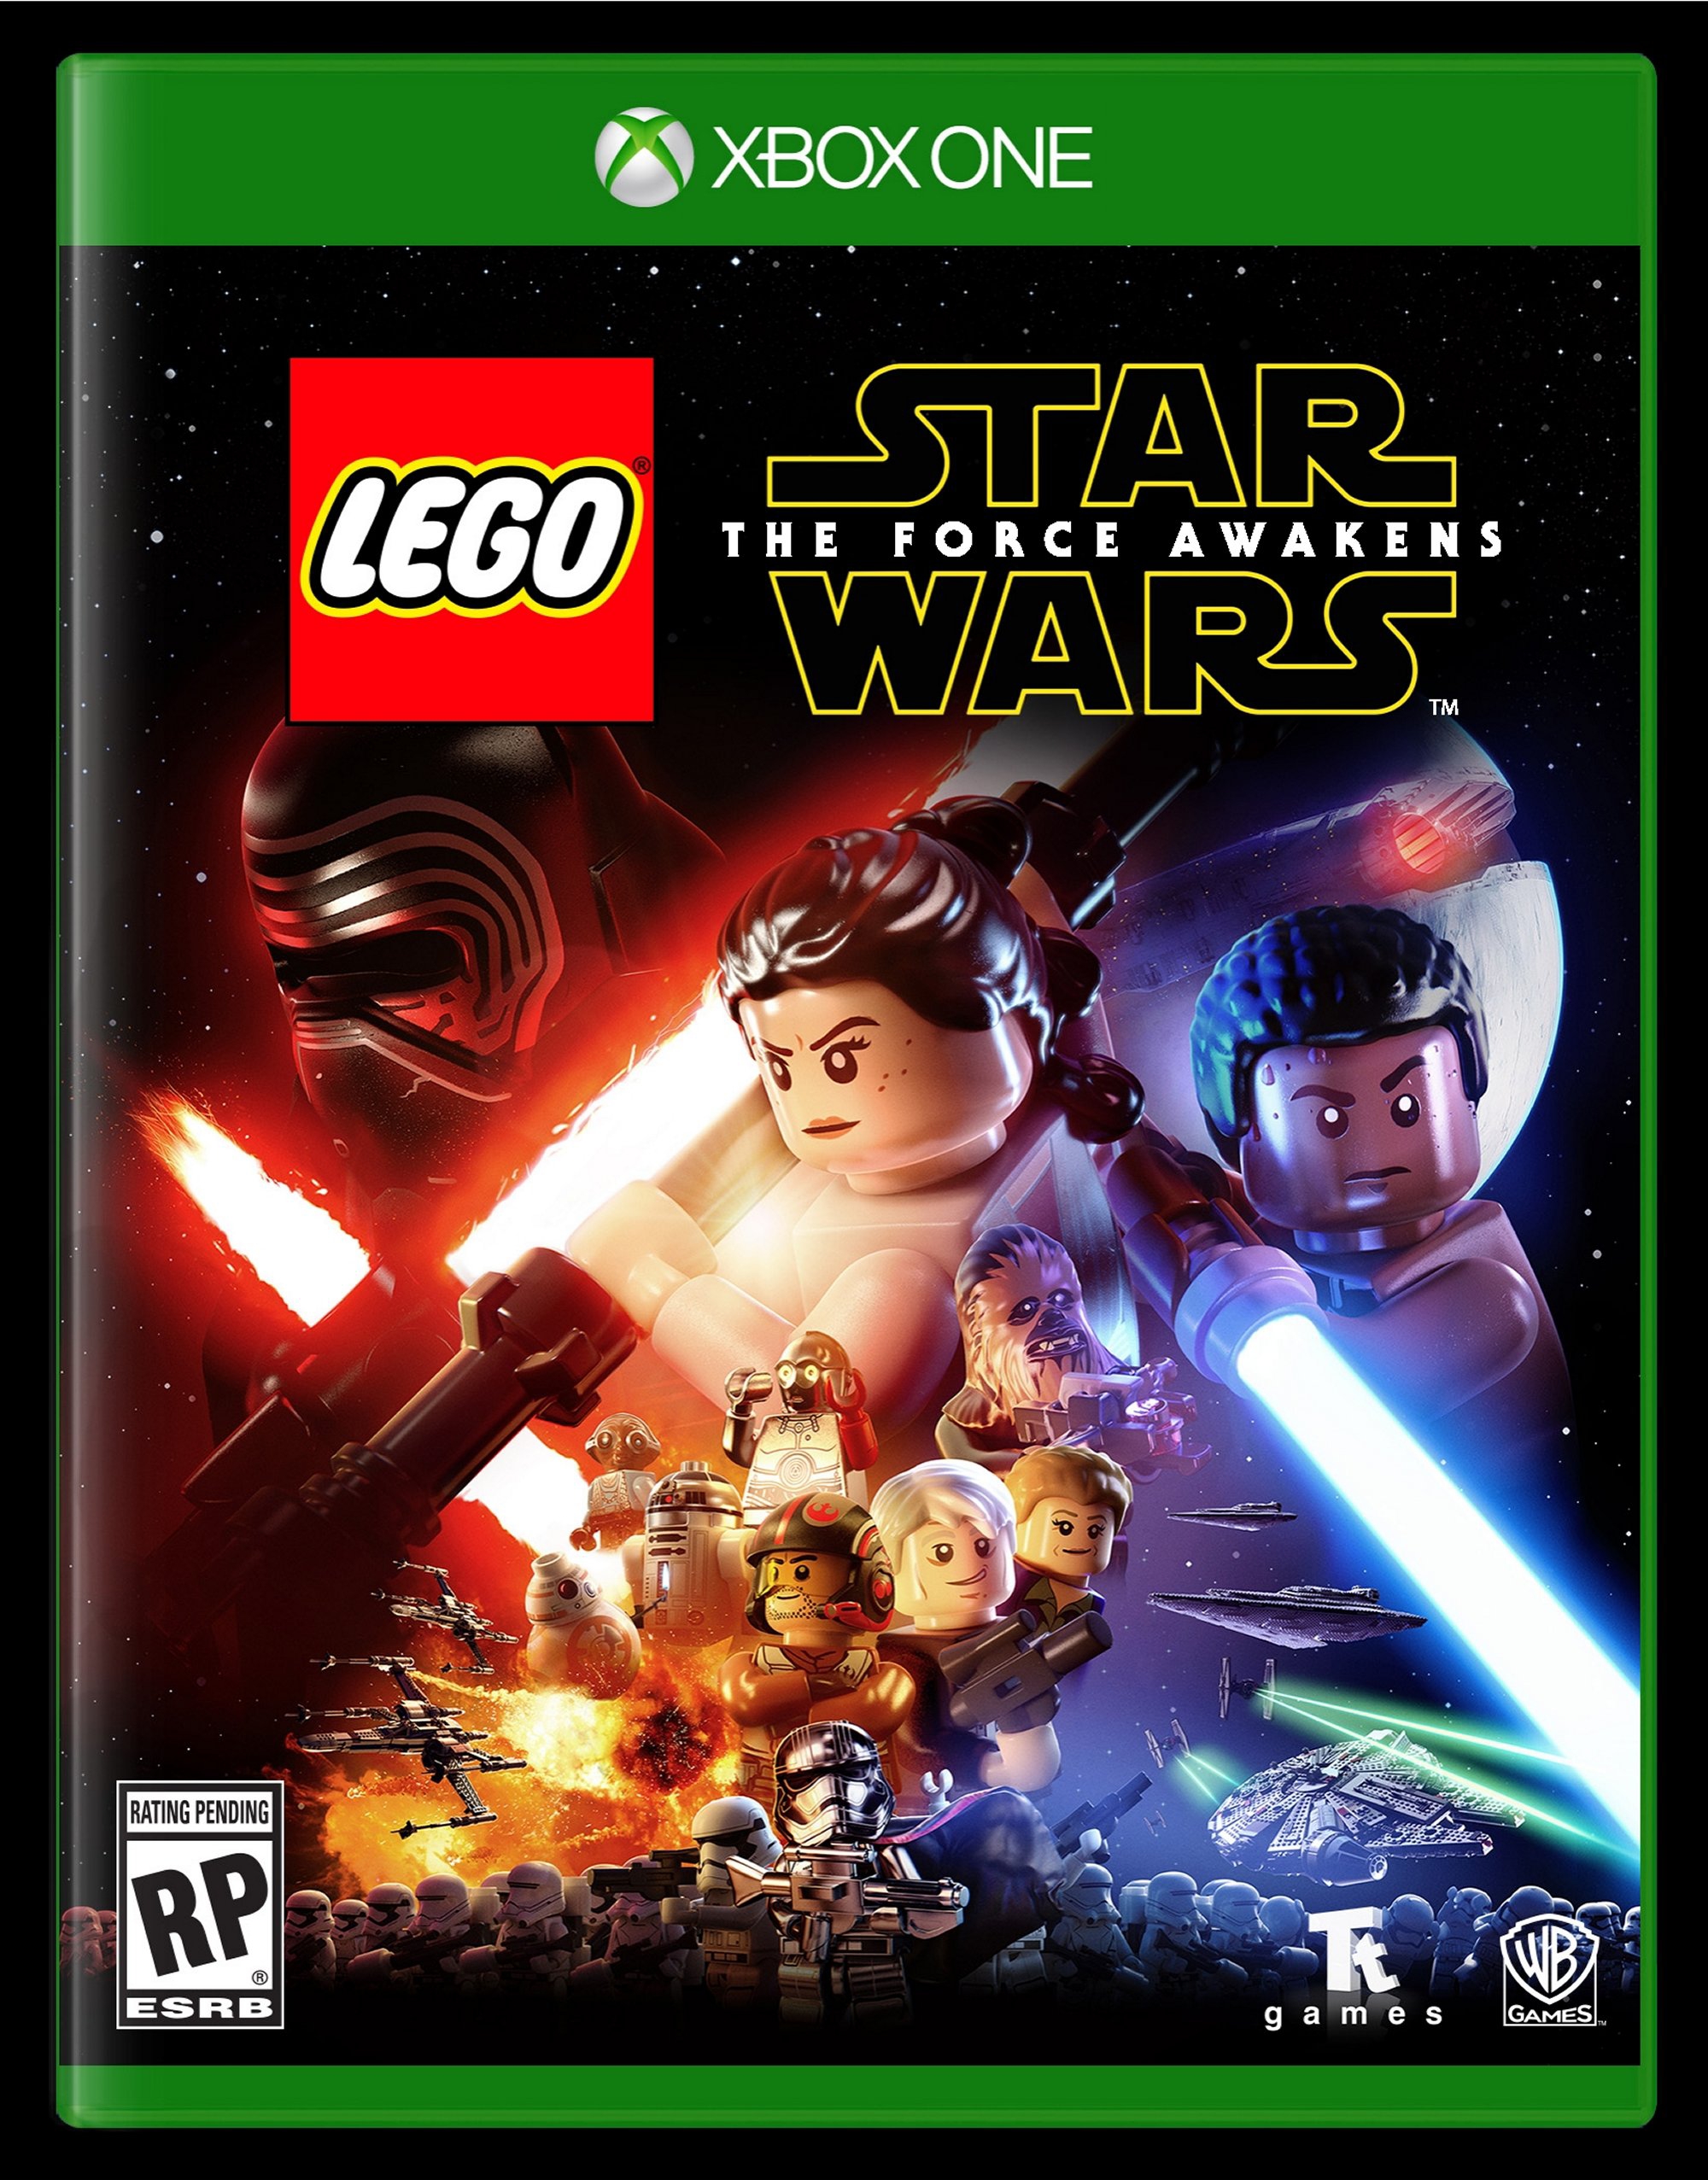 LEGO® Wars™: The Force Awakens Xbox One Game 5005140 | Star Wars™ | Buy online at the Official LEGO® Shop US